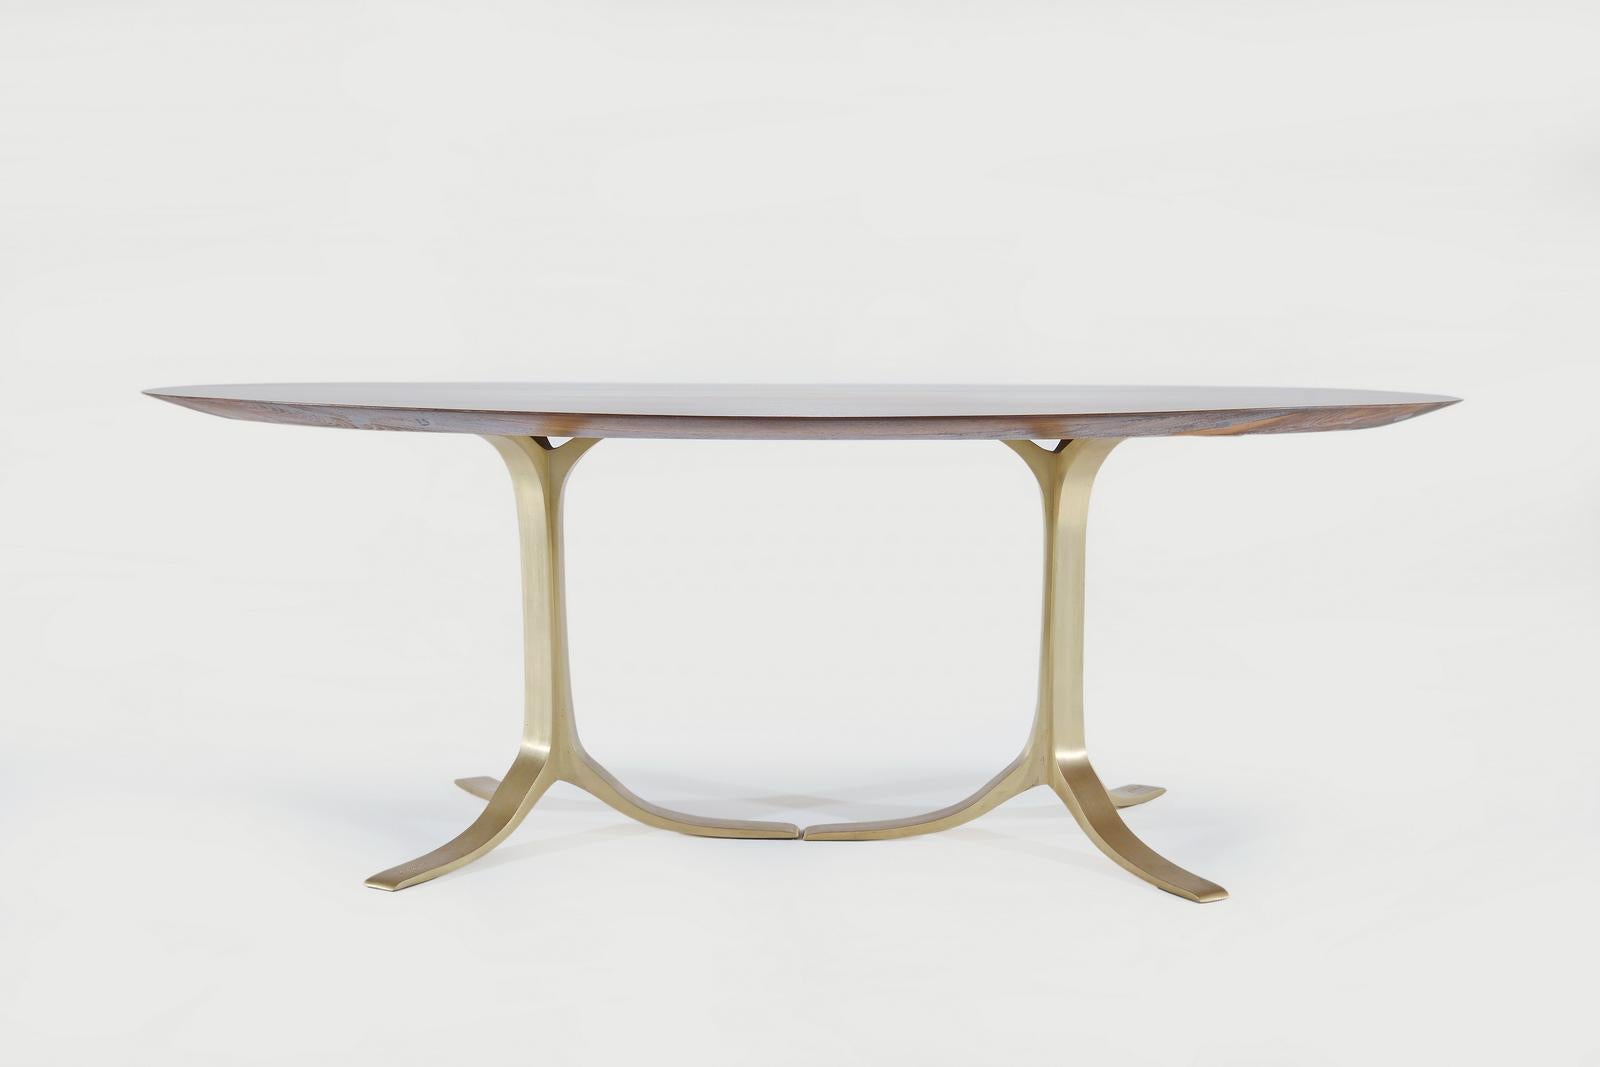 Bespoke Oval Table, Reclaimed Hardwood with Brass Base, by P. Tendercool In New Condition For Sale In Bangkok, TH